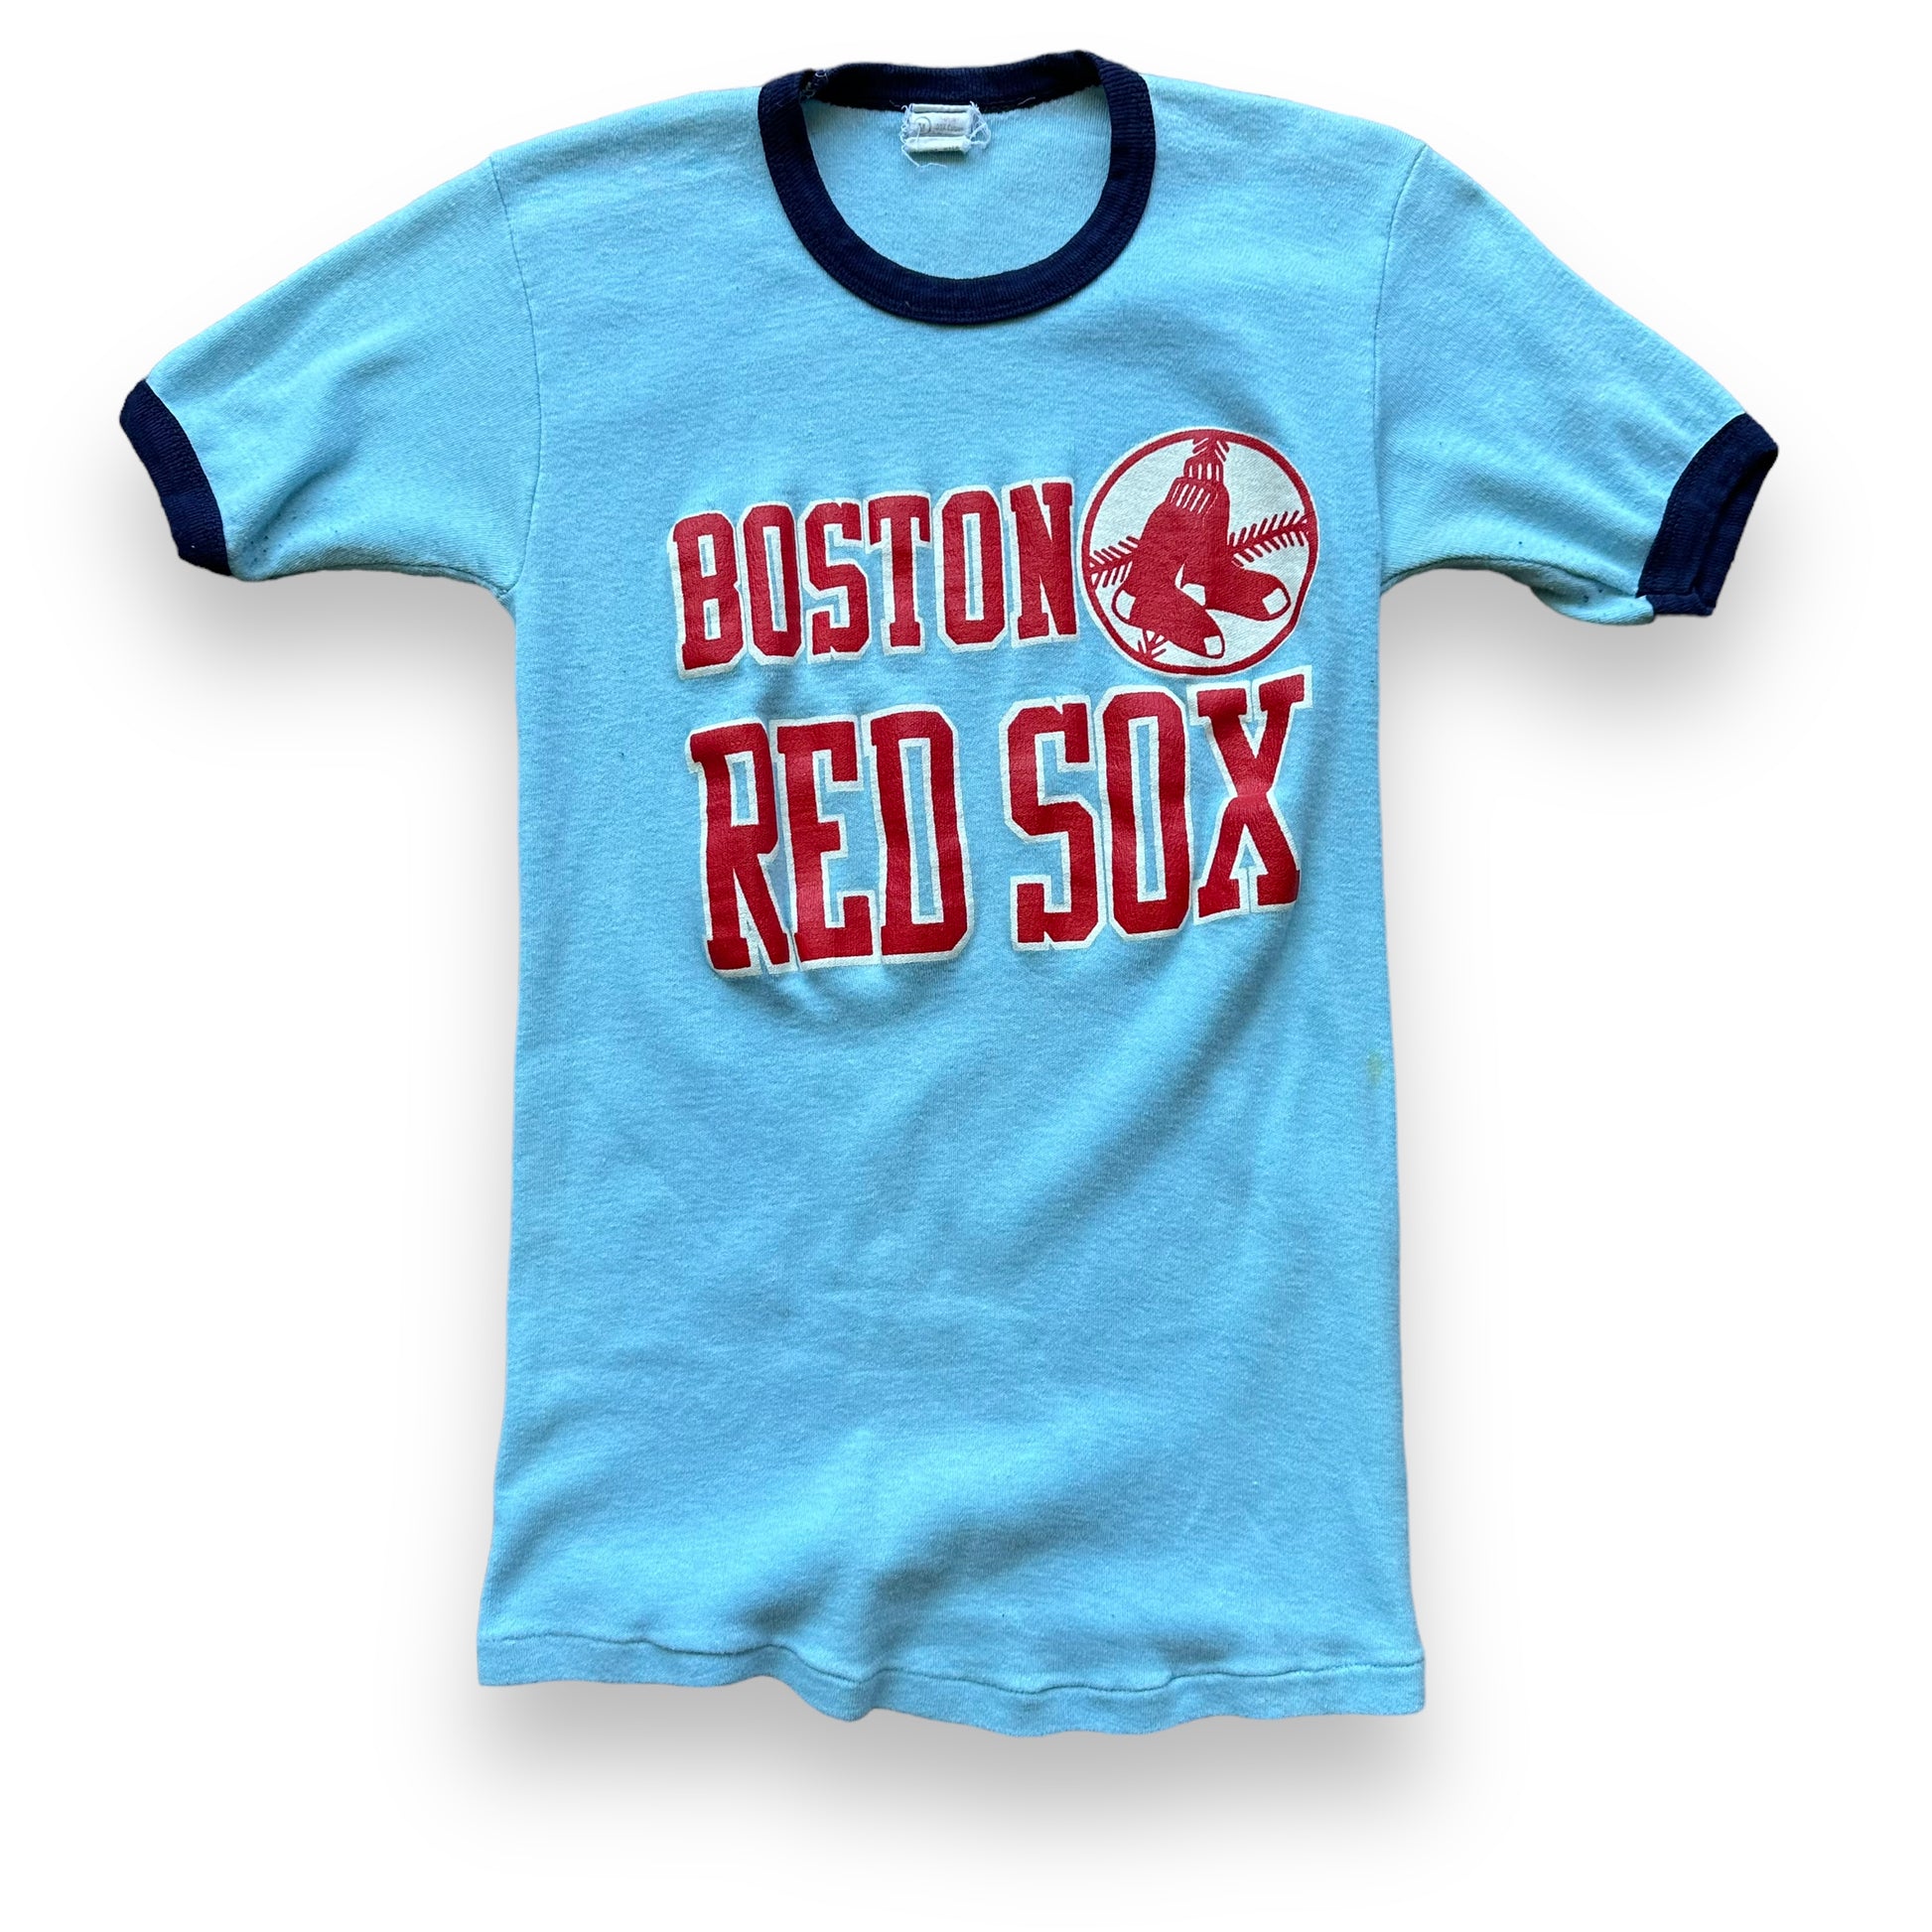 Boston Red Sox Apparel, Red Sox Gear, Merchandise